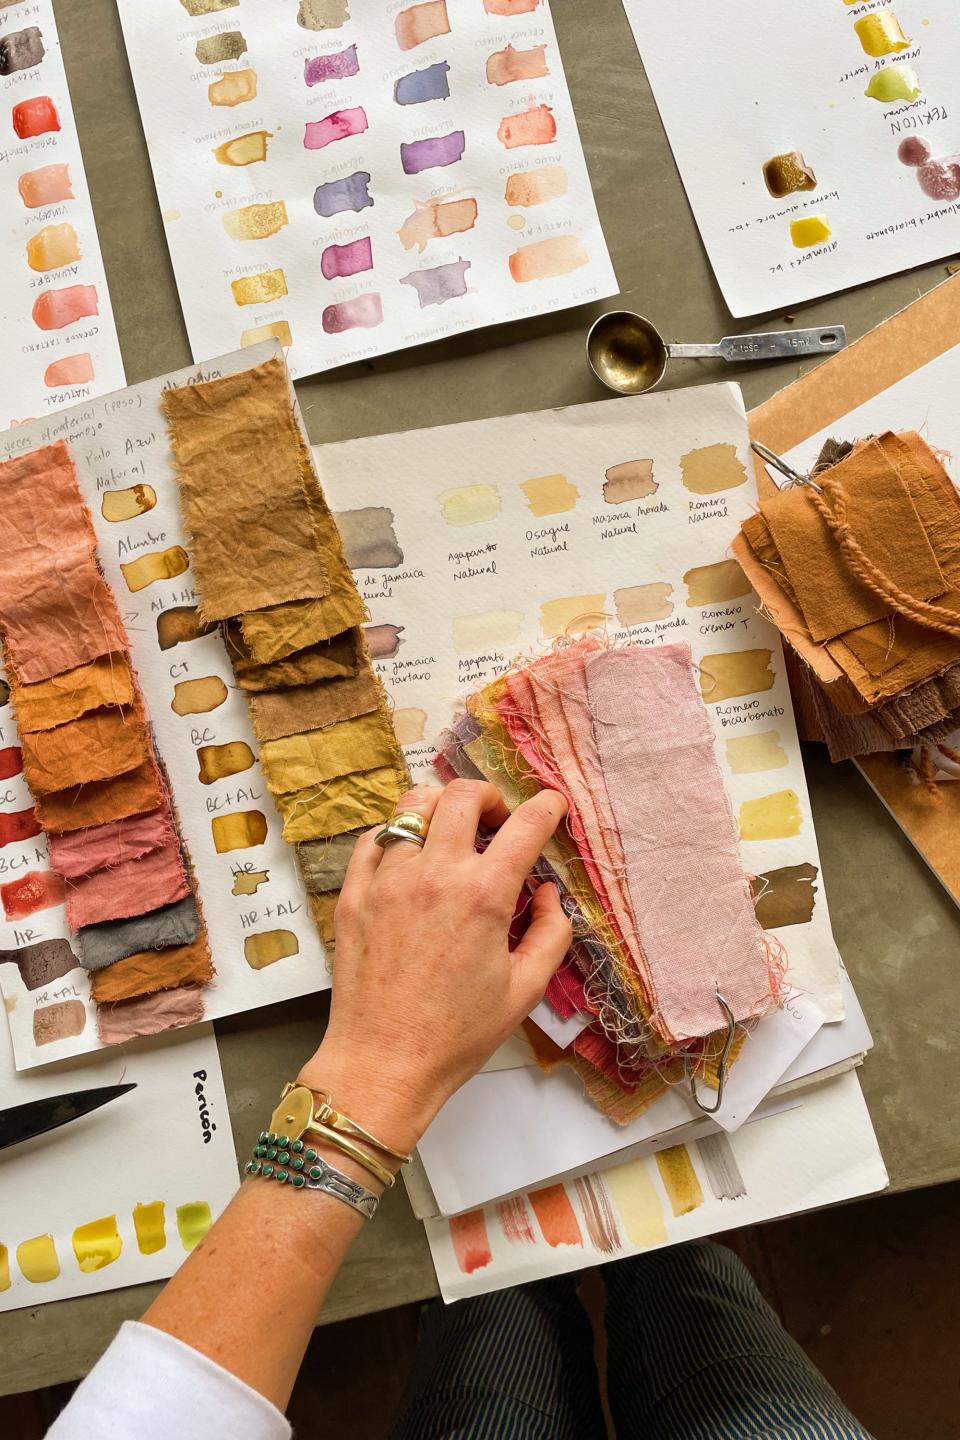 The studio offers a natural dye workshop.